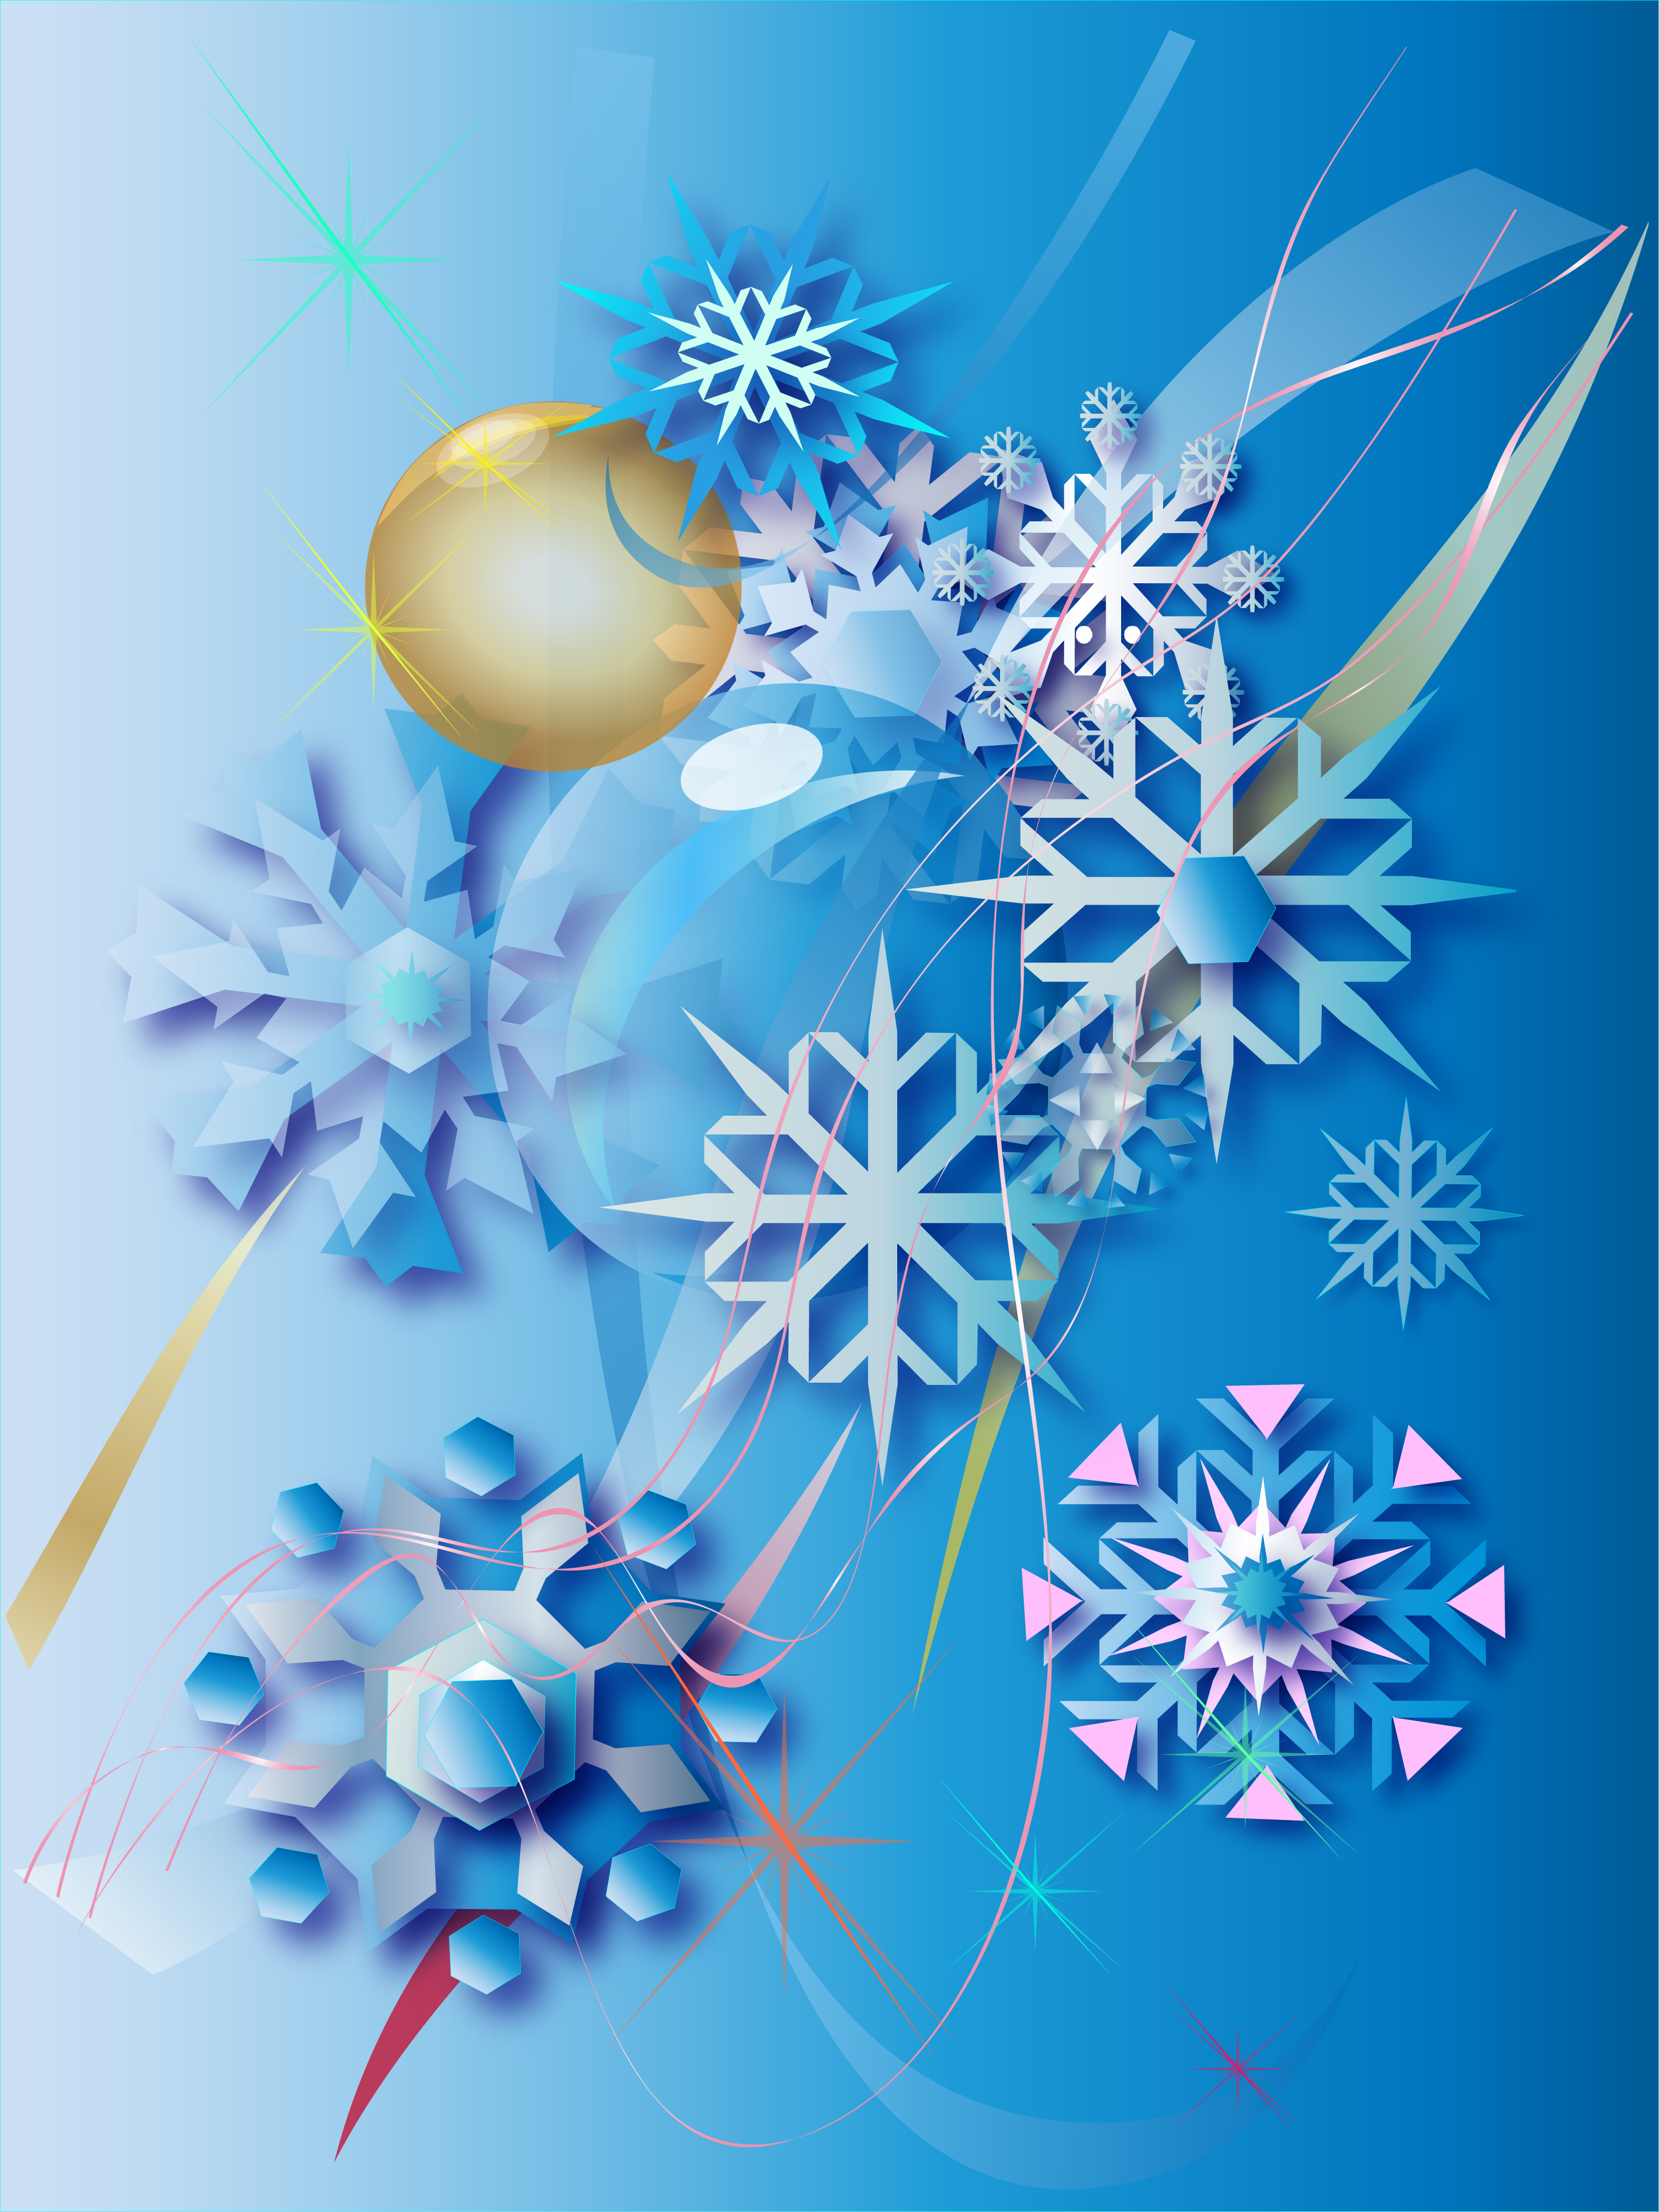 Snowflakes and gold en  ball